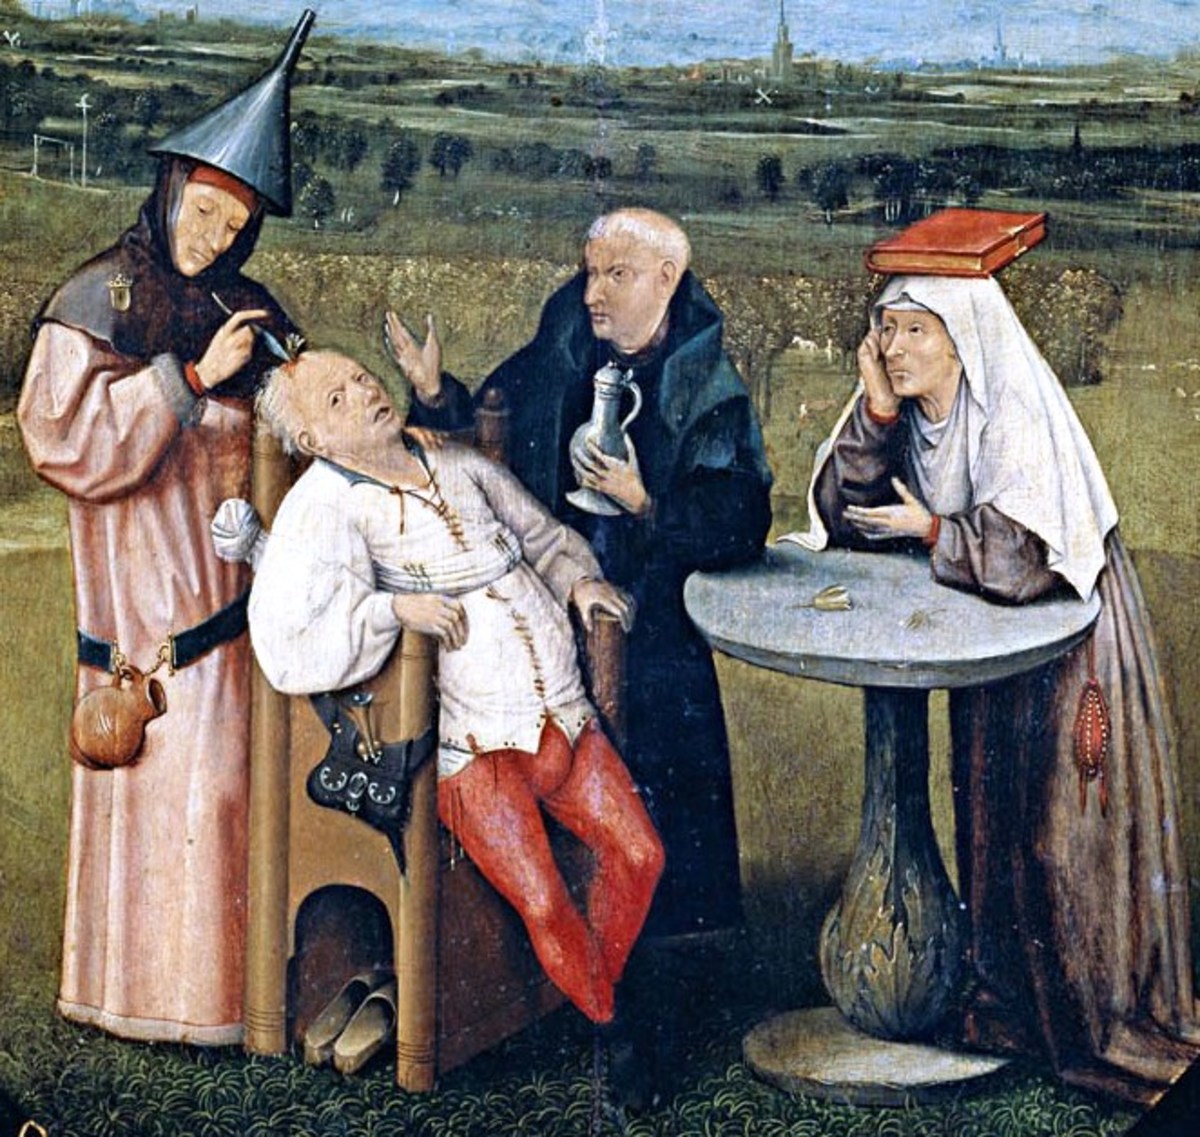 Hieronymus Bosch, in about 1494, painted a surgeon performing a trepanation.